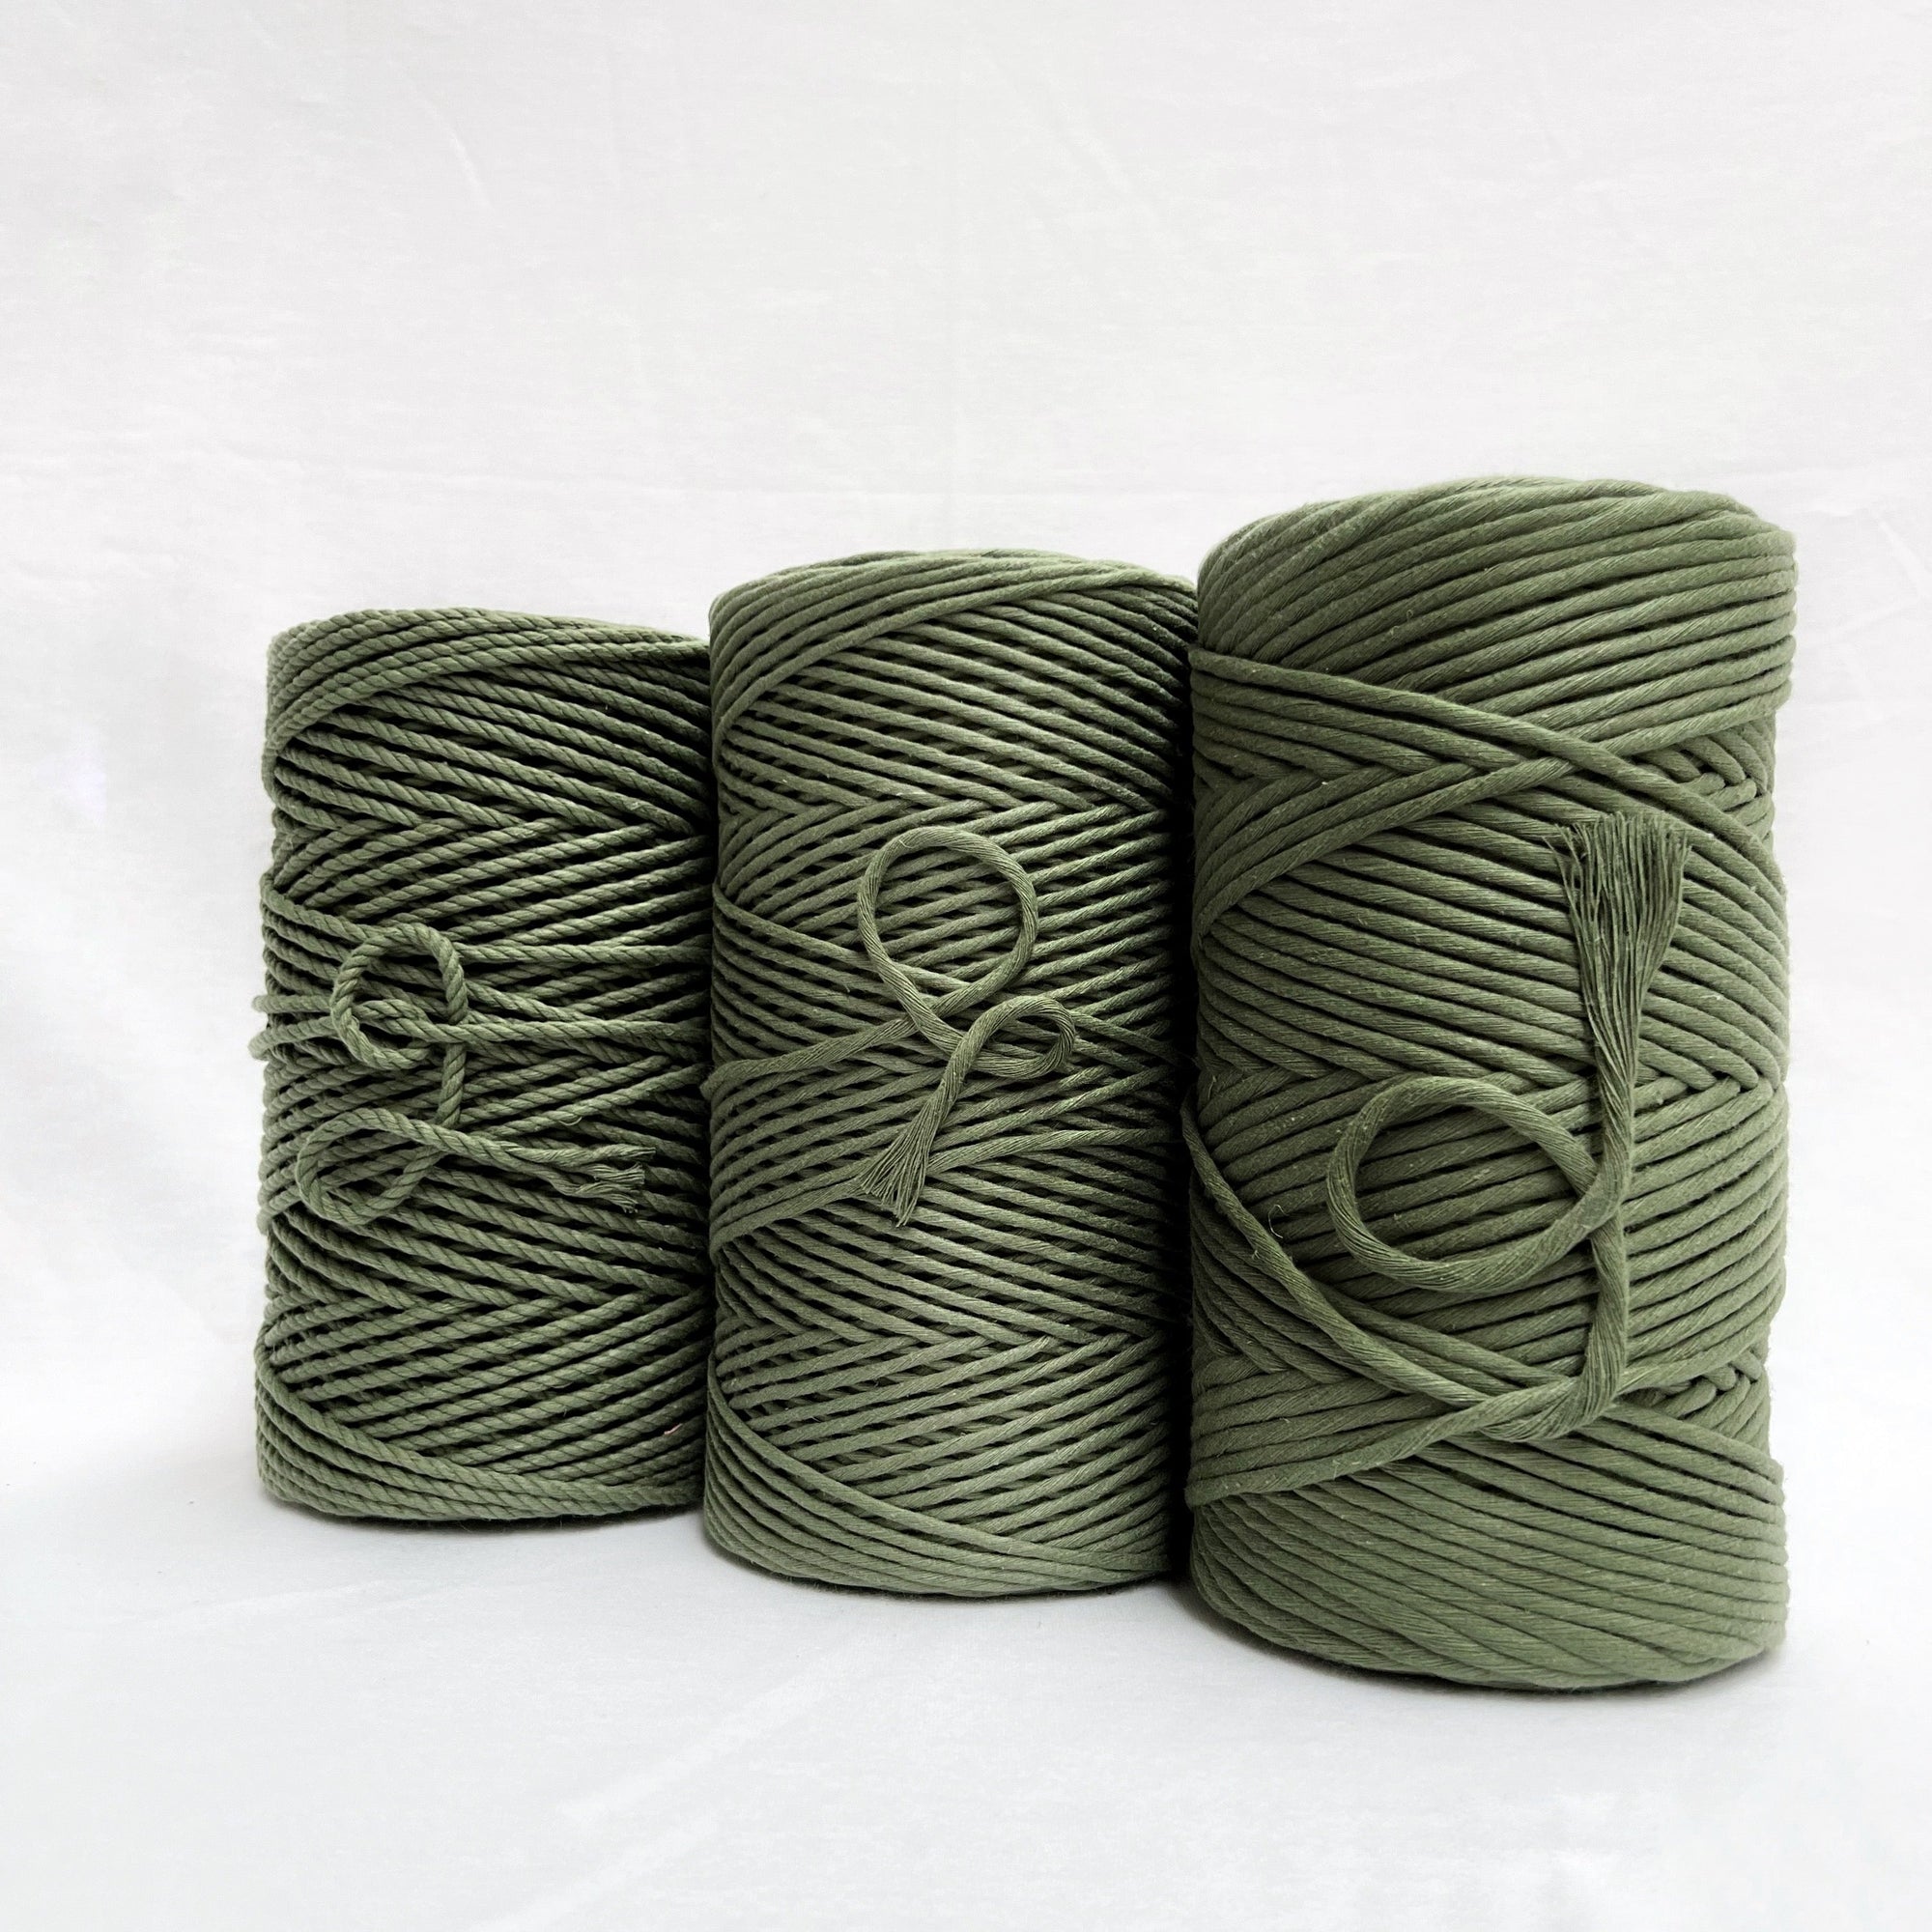 mary maker studio 1kg 4mm recycled cotton macrame rope in cool forest green colour suitable for macrame workshops beginners and advanced artists